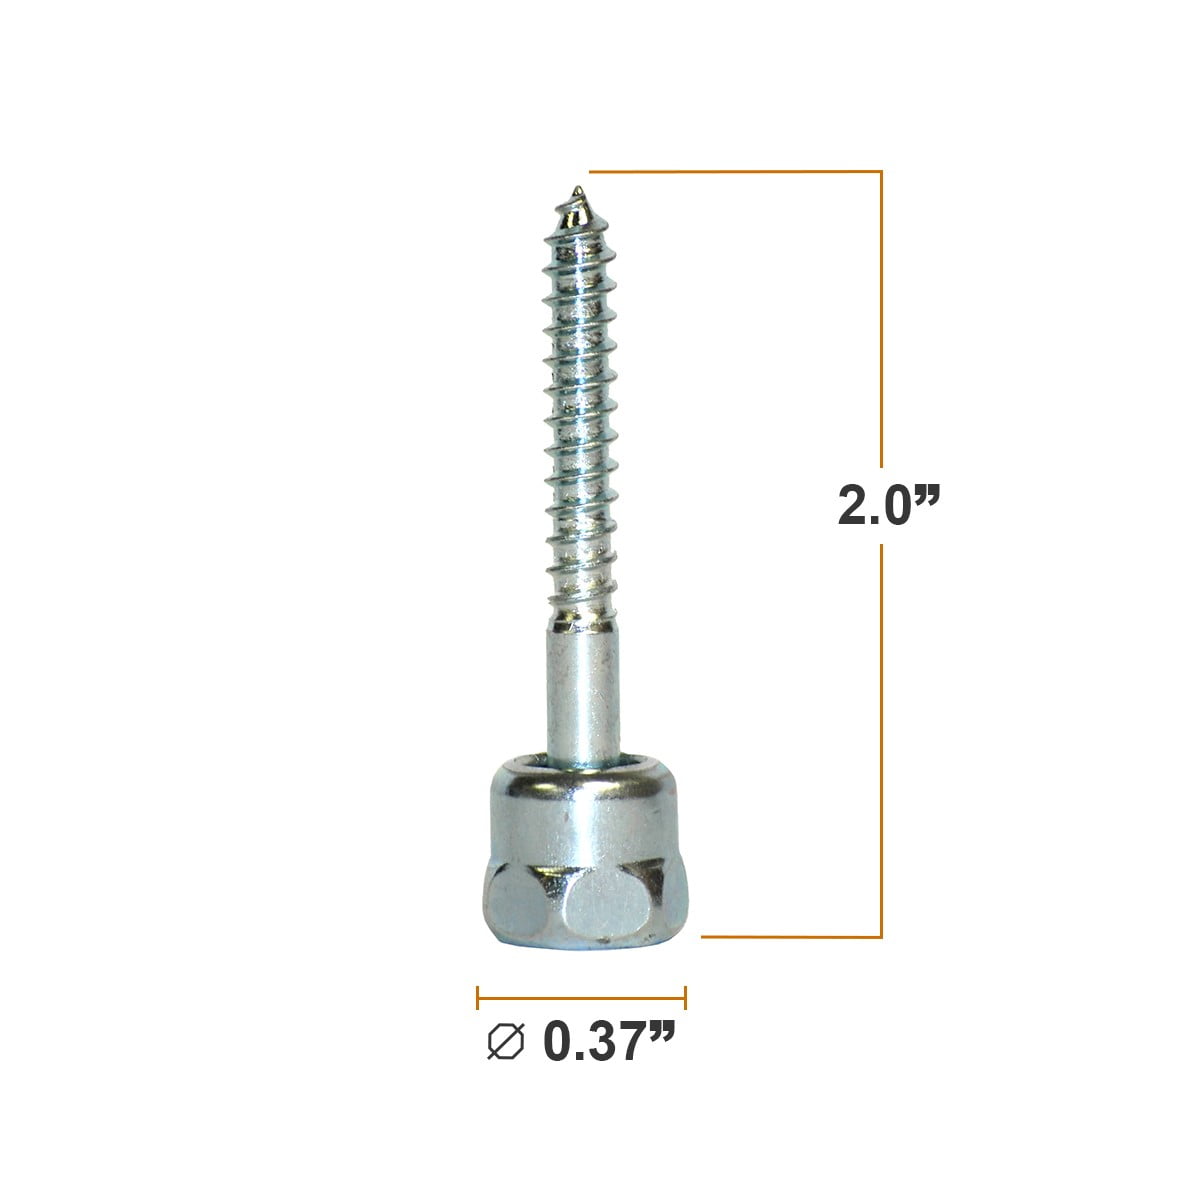 Sammy’s Box of 25  1” Vertical 1/4” Threaded Rod Anchor for Wood 3 Pack 